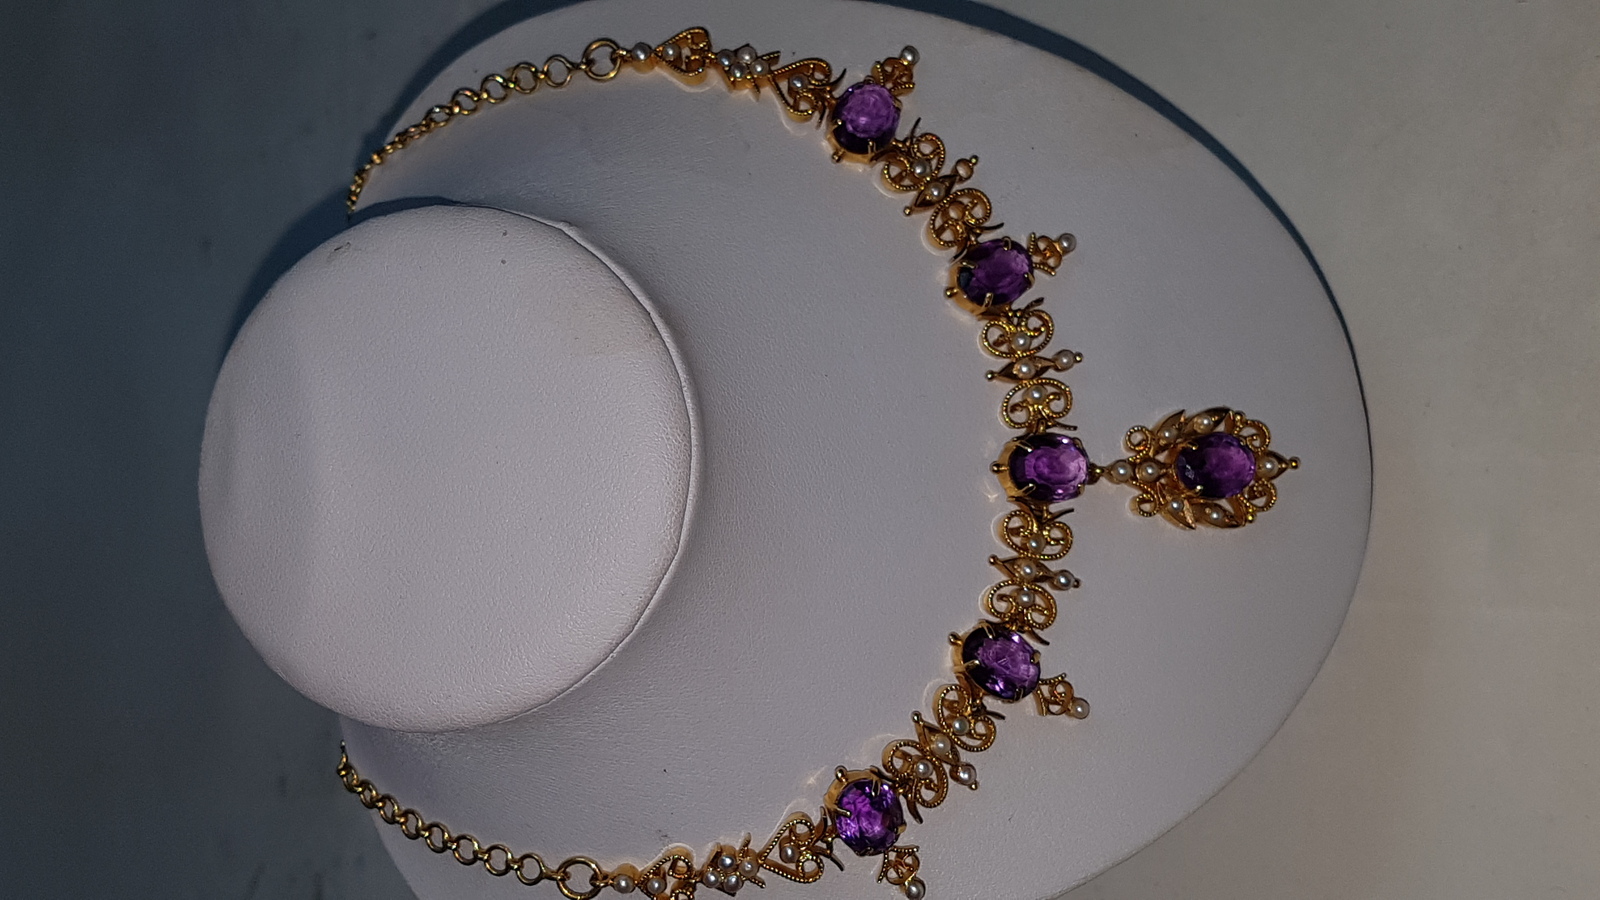 A 22 ct Gold, Amethyst And Seed Pearl Necklace